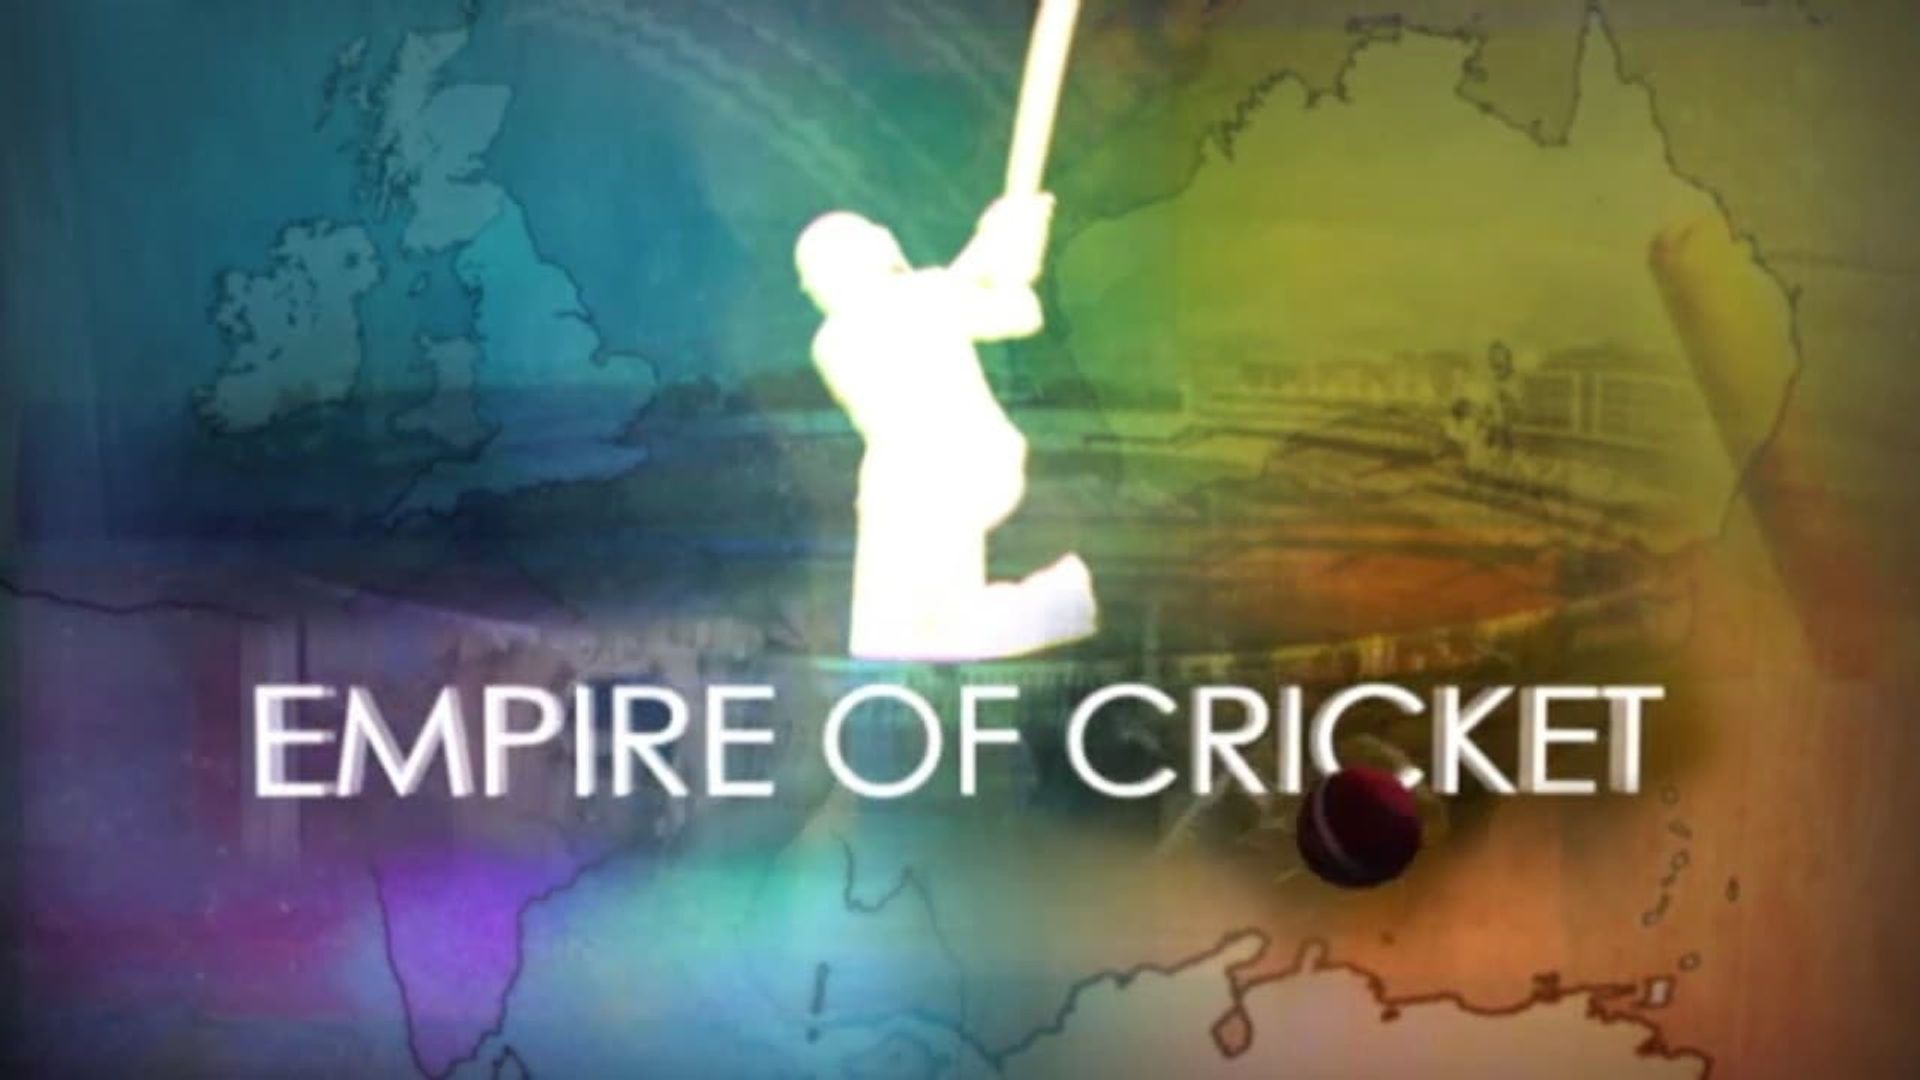 Empire of Cricket background